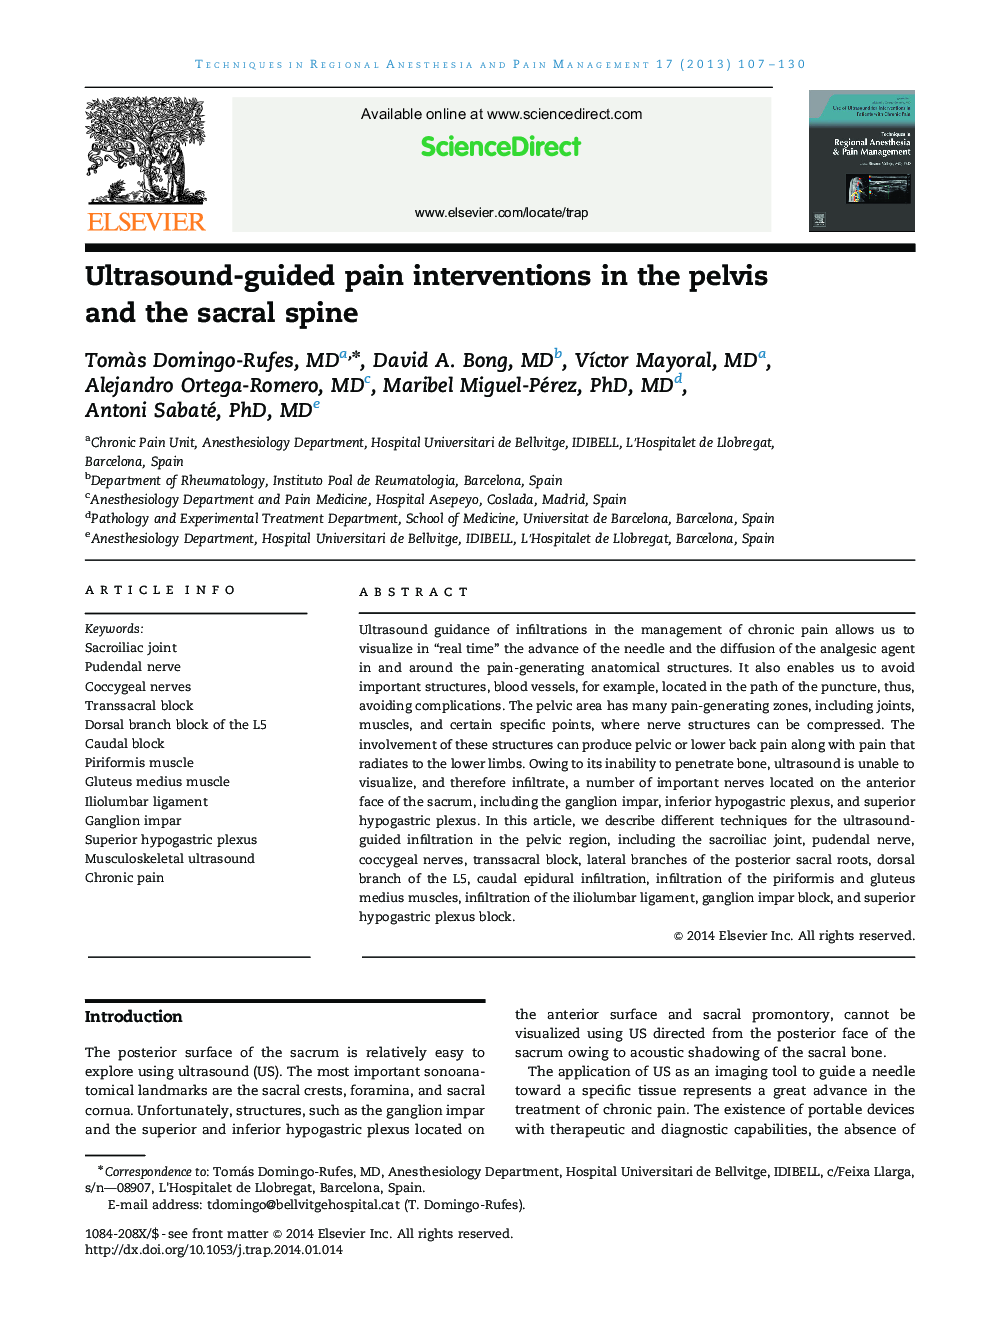 Ultrasound-guided pain interventions in the pelvis and the sacral spine